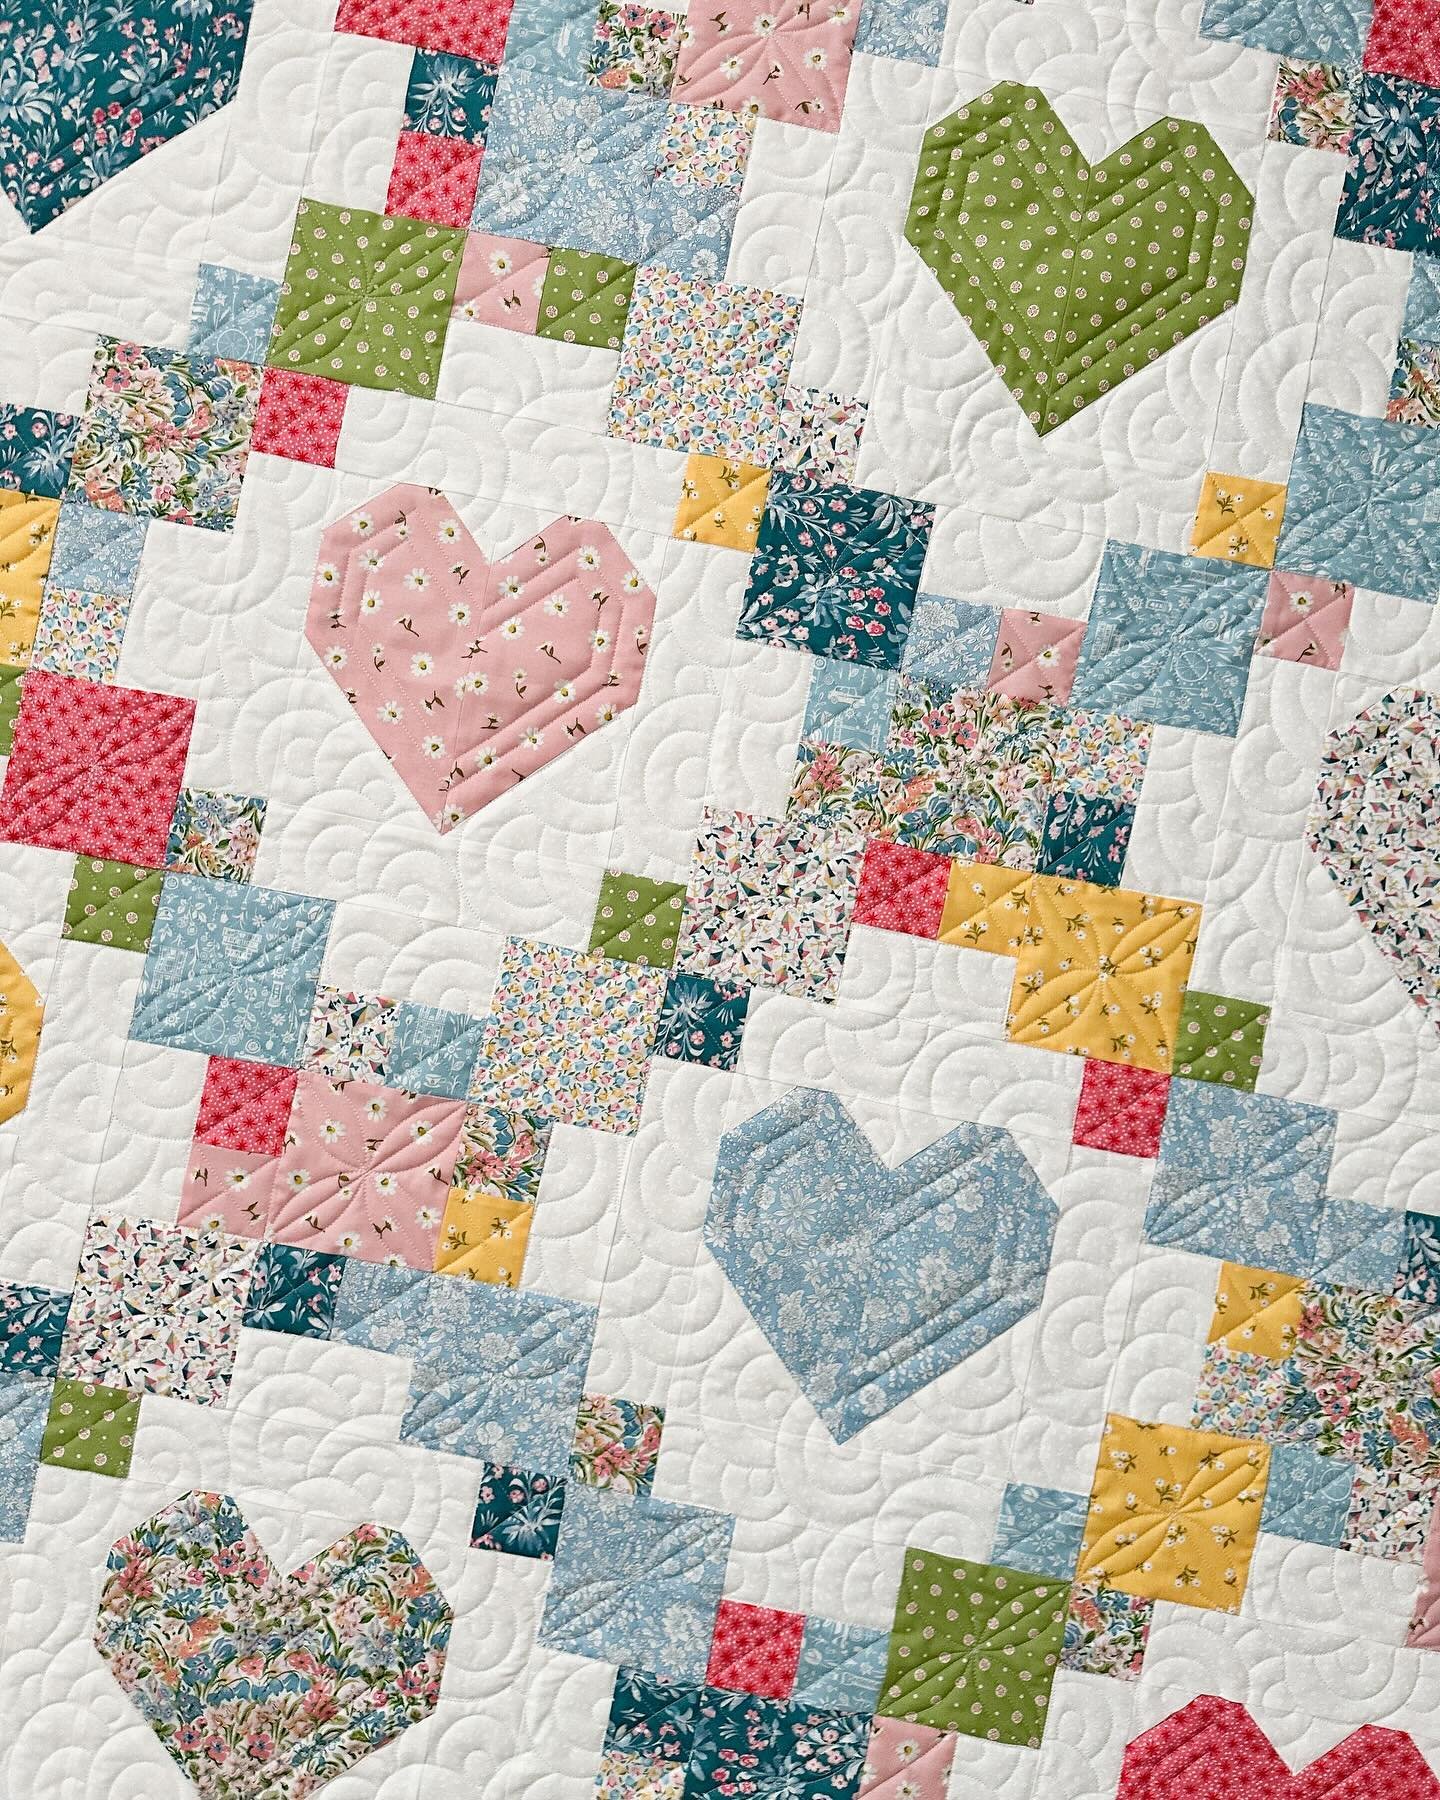 Louise made this darling Heartsy baby quilt for one of her grand babies.  So sweet!!!

The Heartsy pattern is by Allison from @cluckclucksew 

I used my 4&rdquo; Circle2 ruler to quilt the petals in the larger squares.  My Circle2 rulers can be found